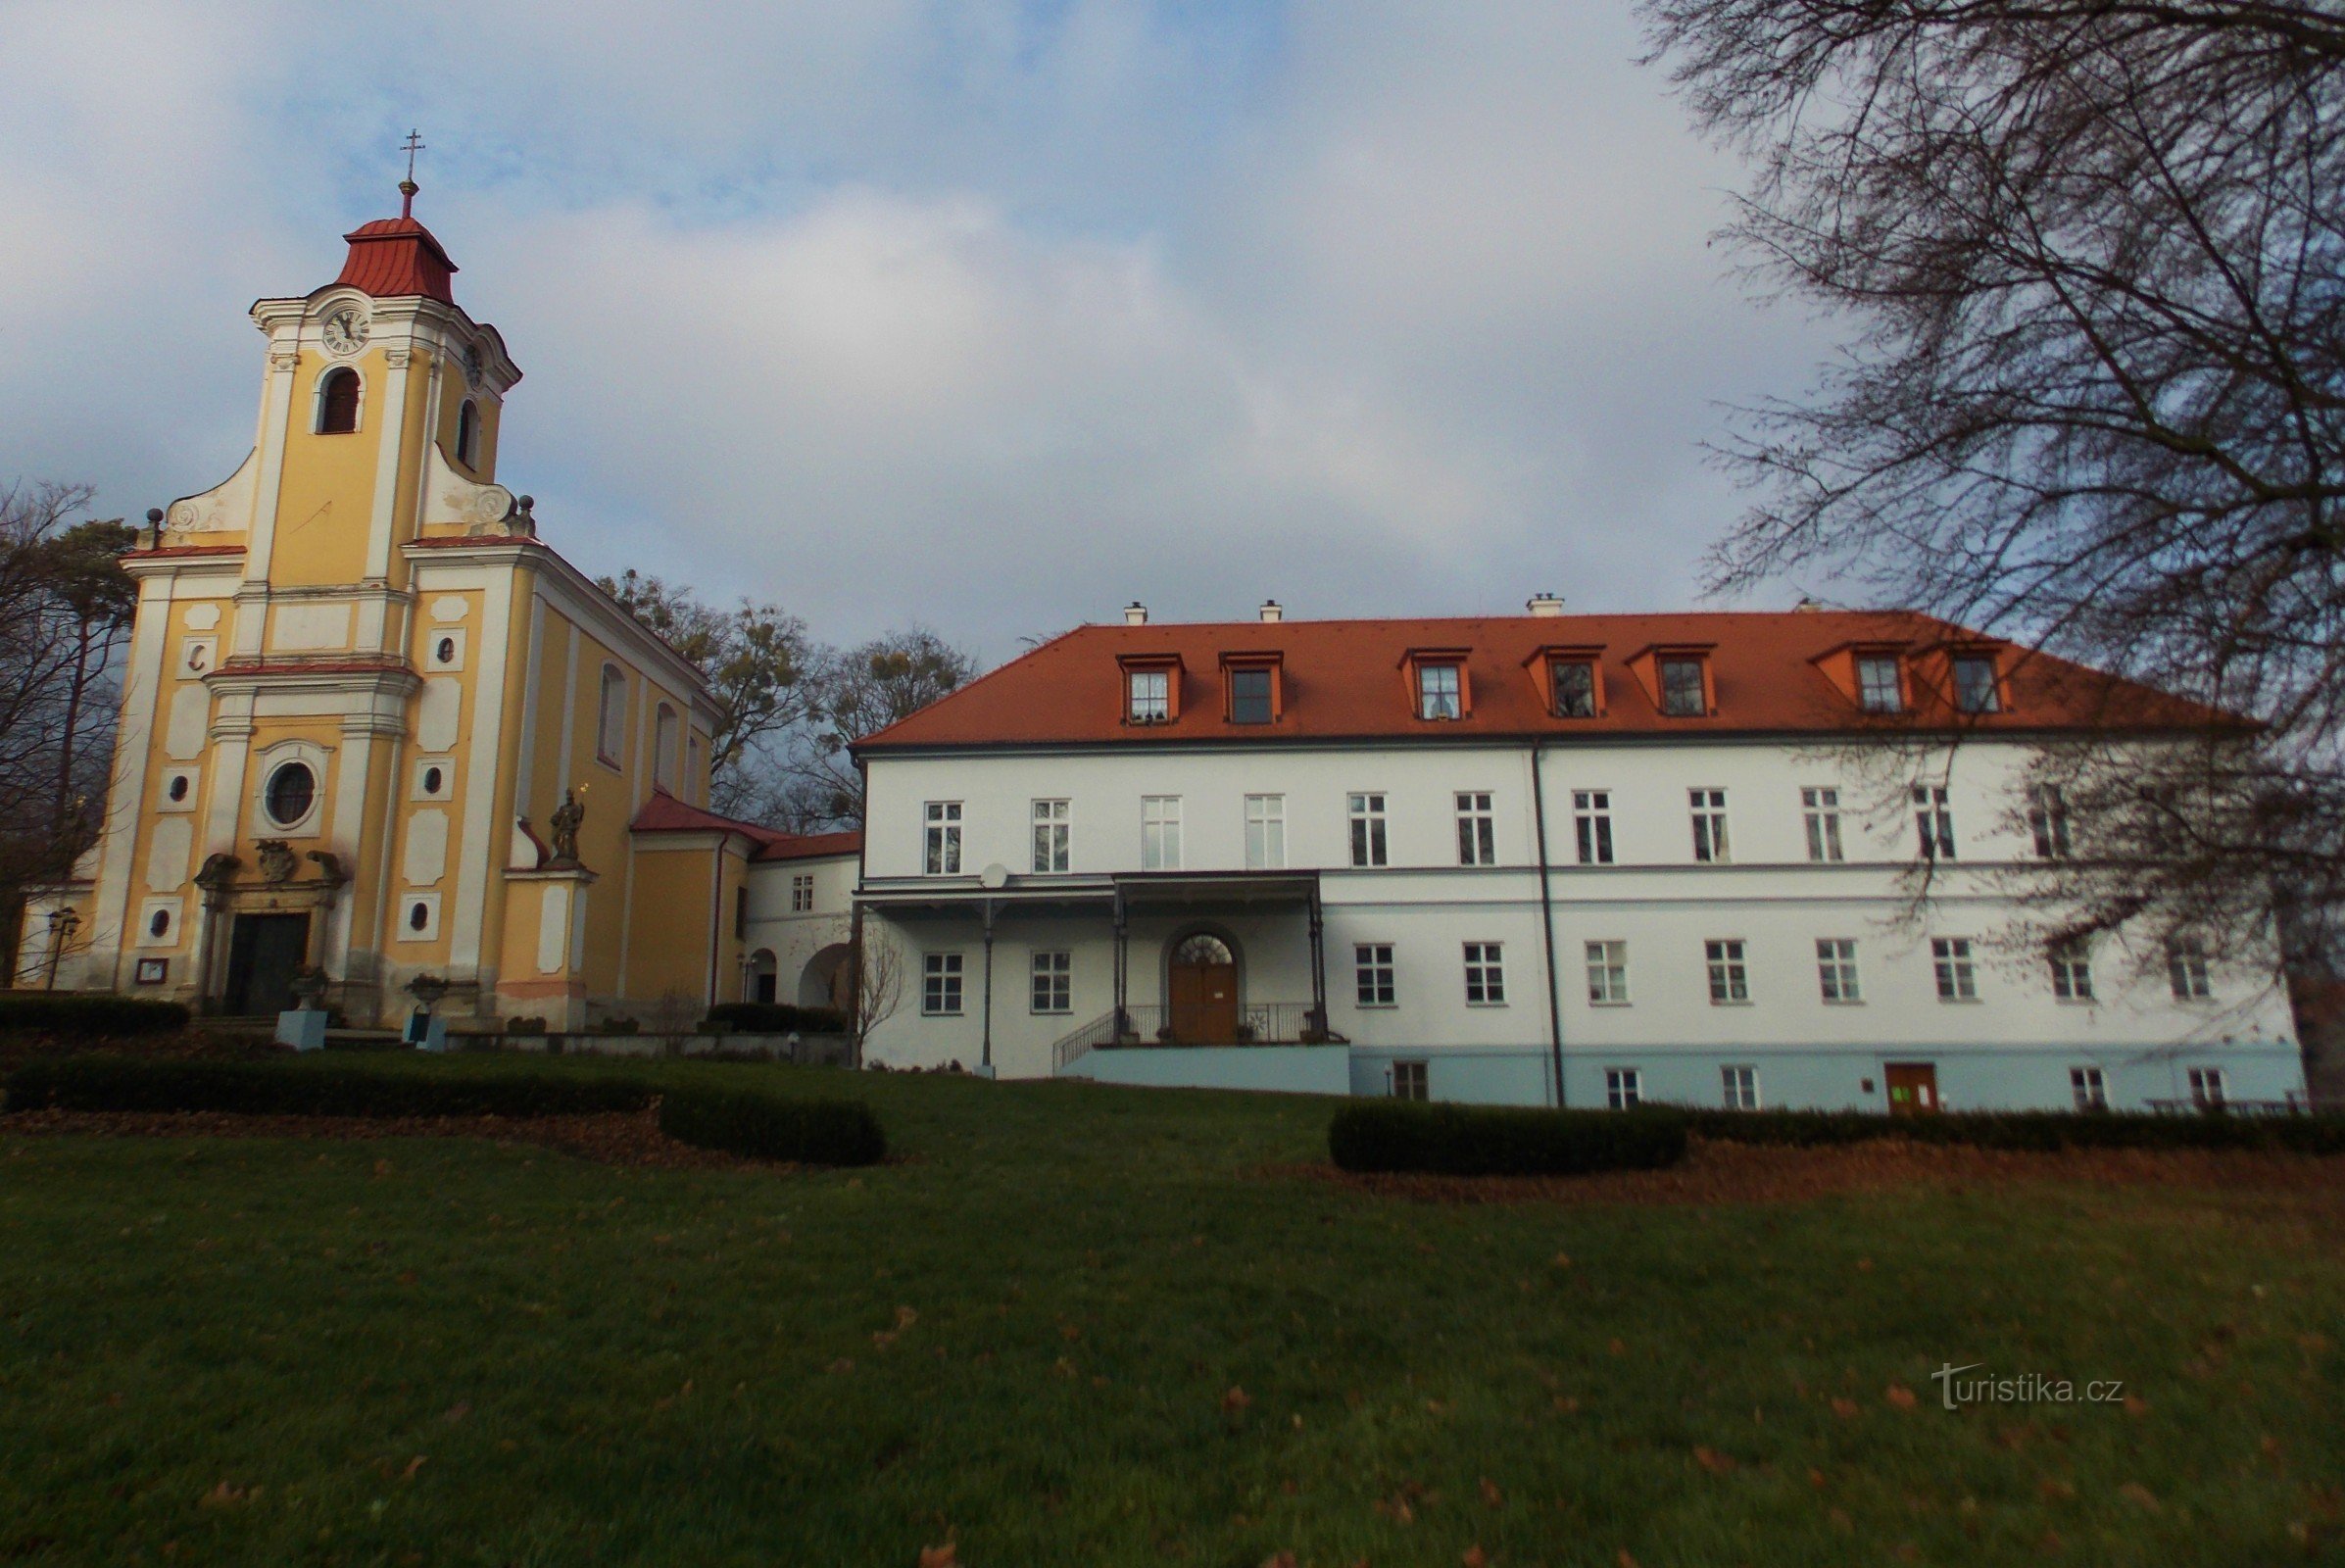 Castle and church grounds in Pohořelice